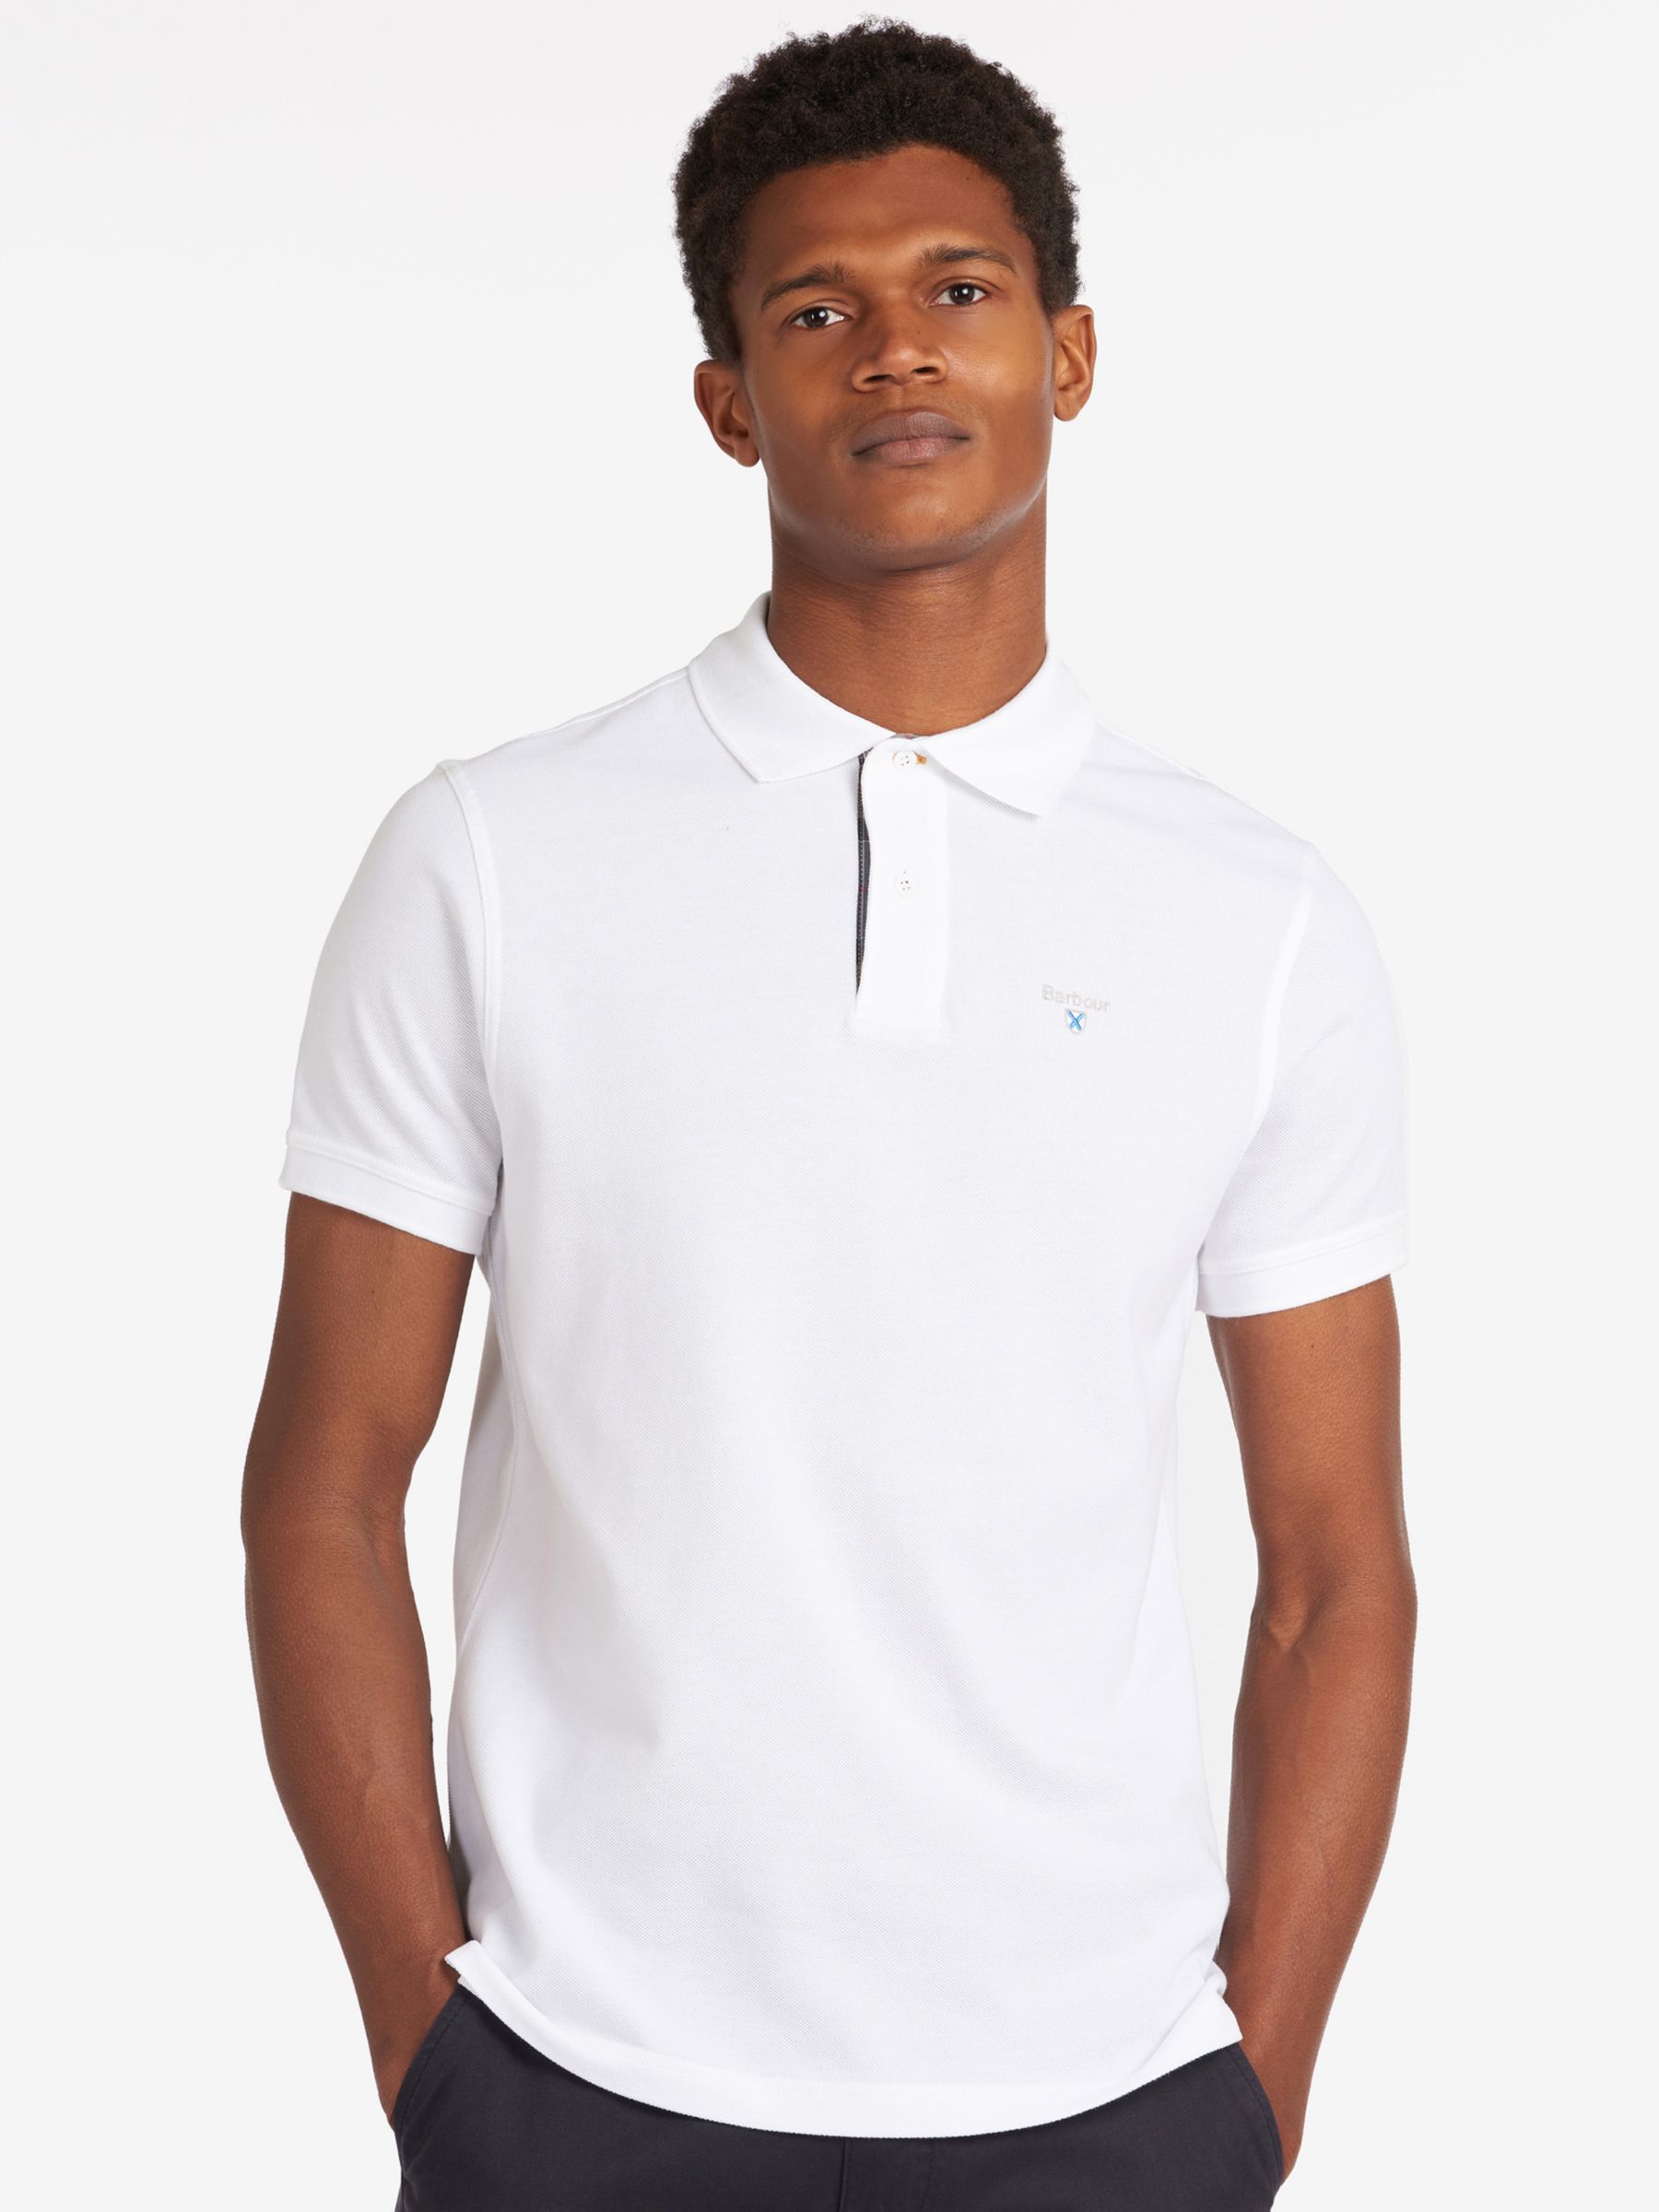 Collared Men\'s Polo & Rugby Shirts | John Lewis & Partners